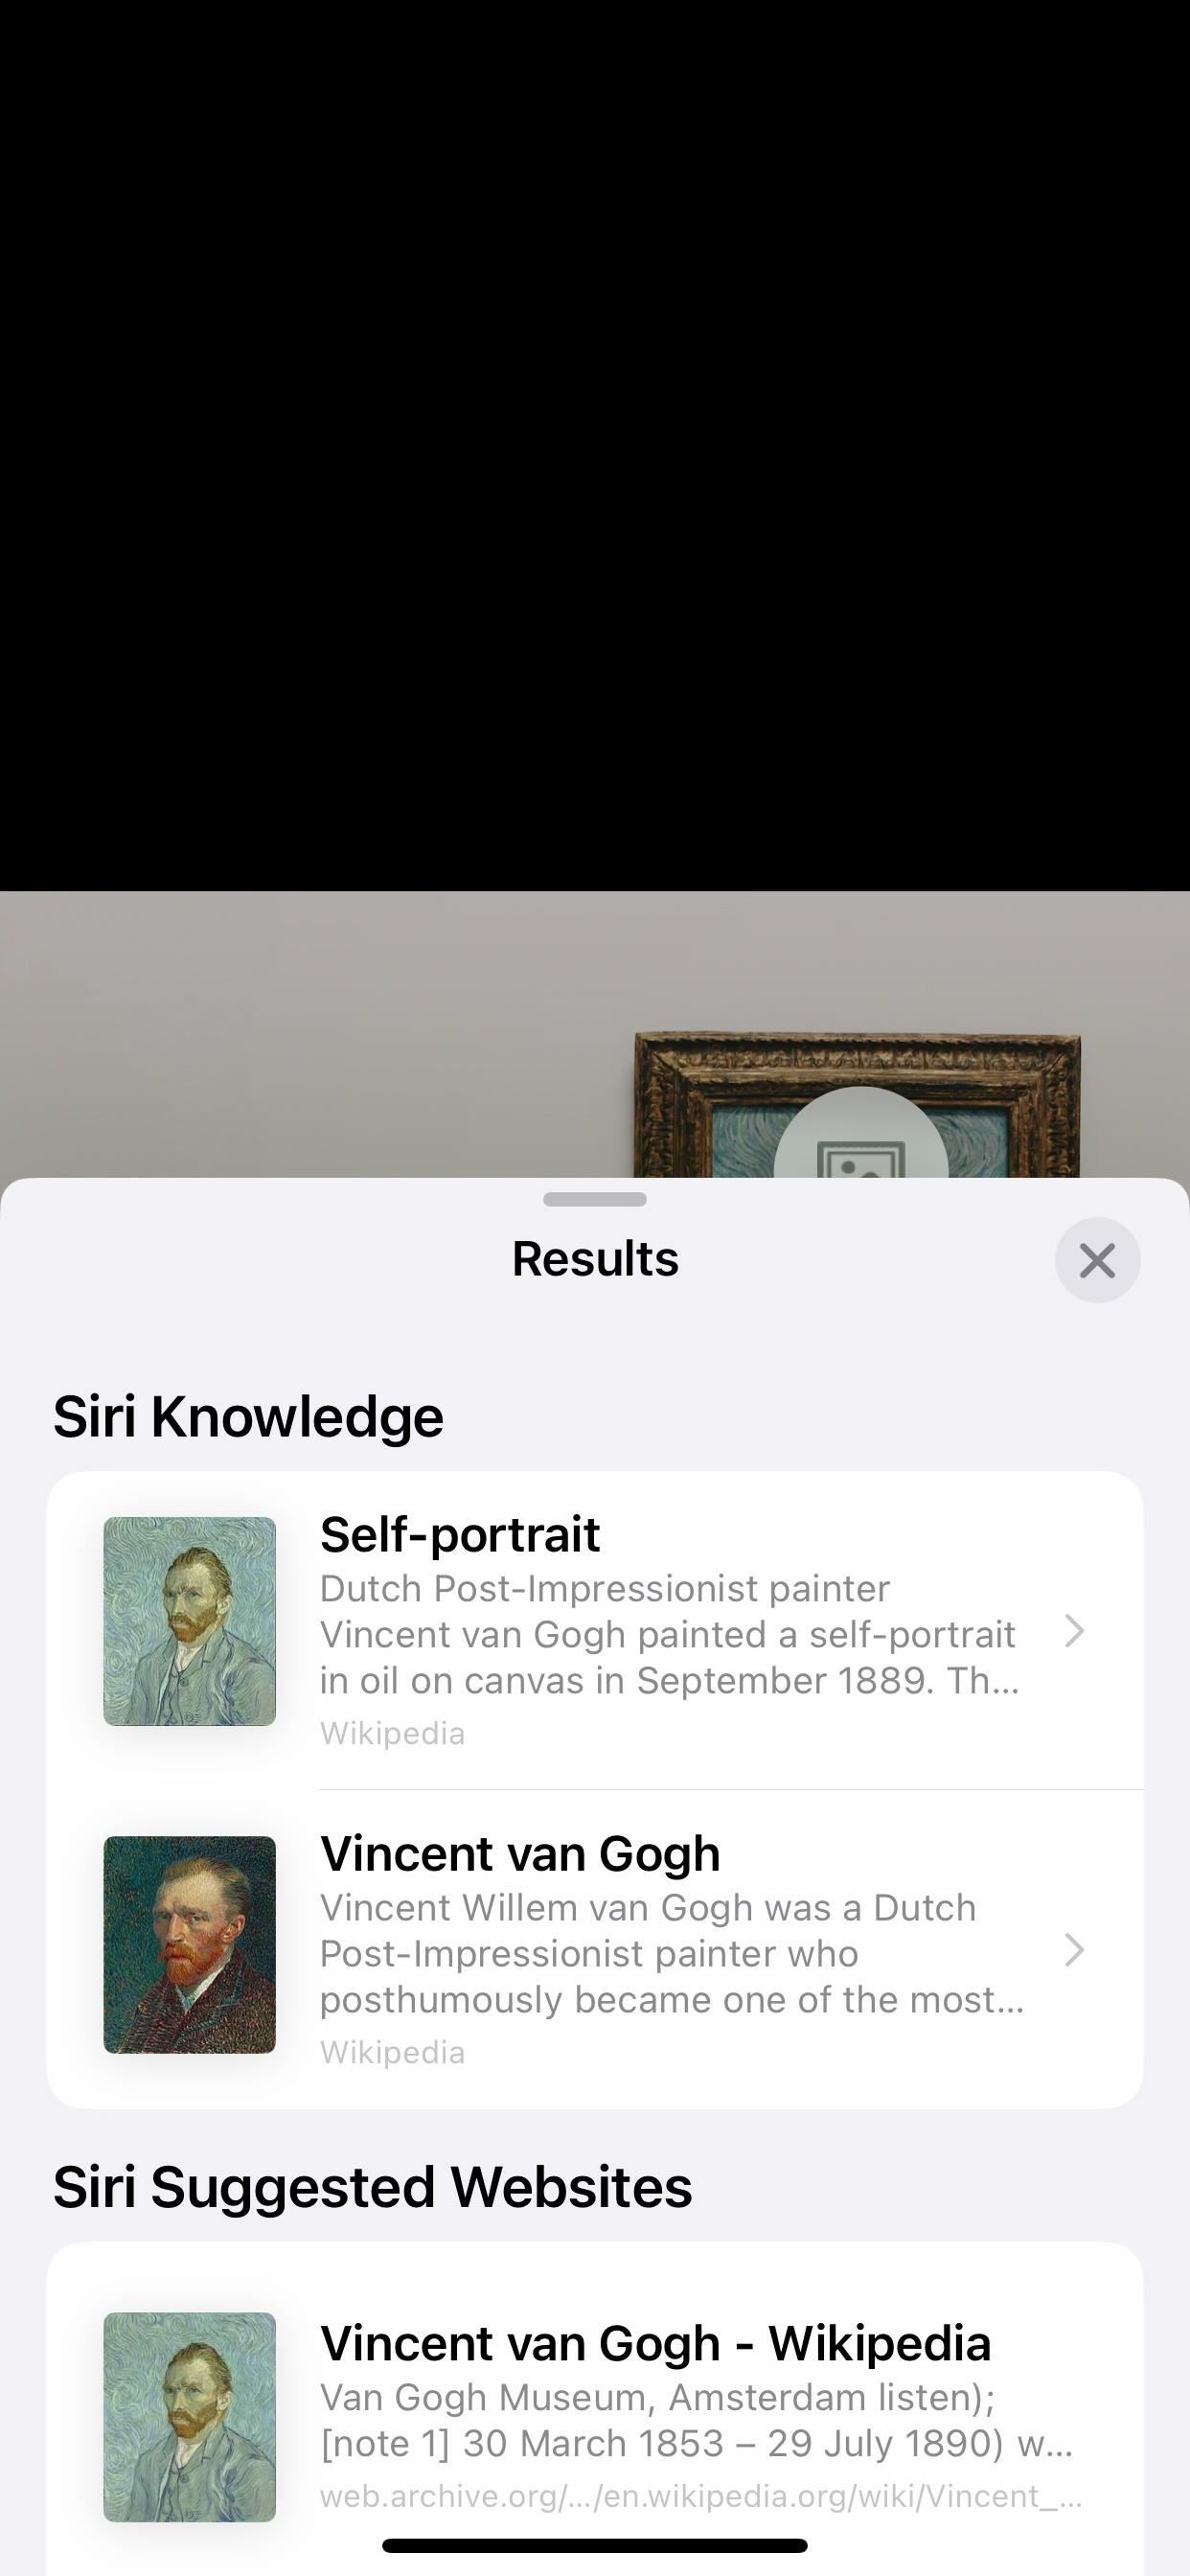 Your iPhone Can Scan Images to Identify and Show Information About Art, Insects, Landmarks, Plants, and More